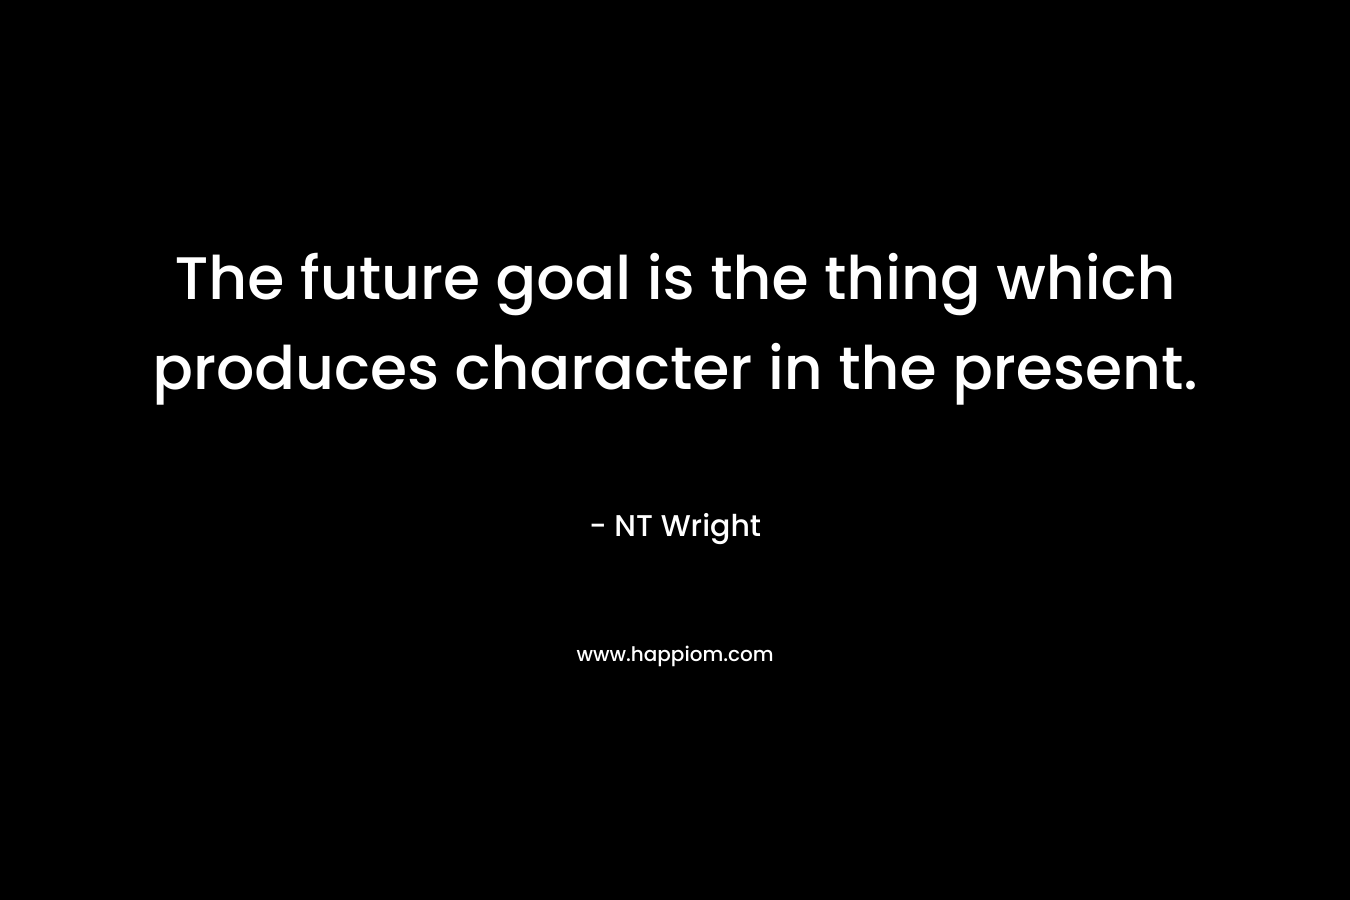 The future goal is the thing which produces character in the present. – NT Wright